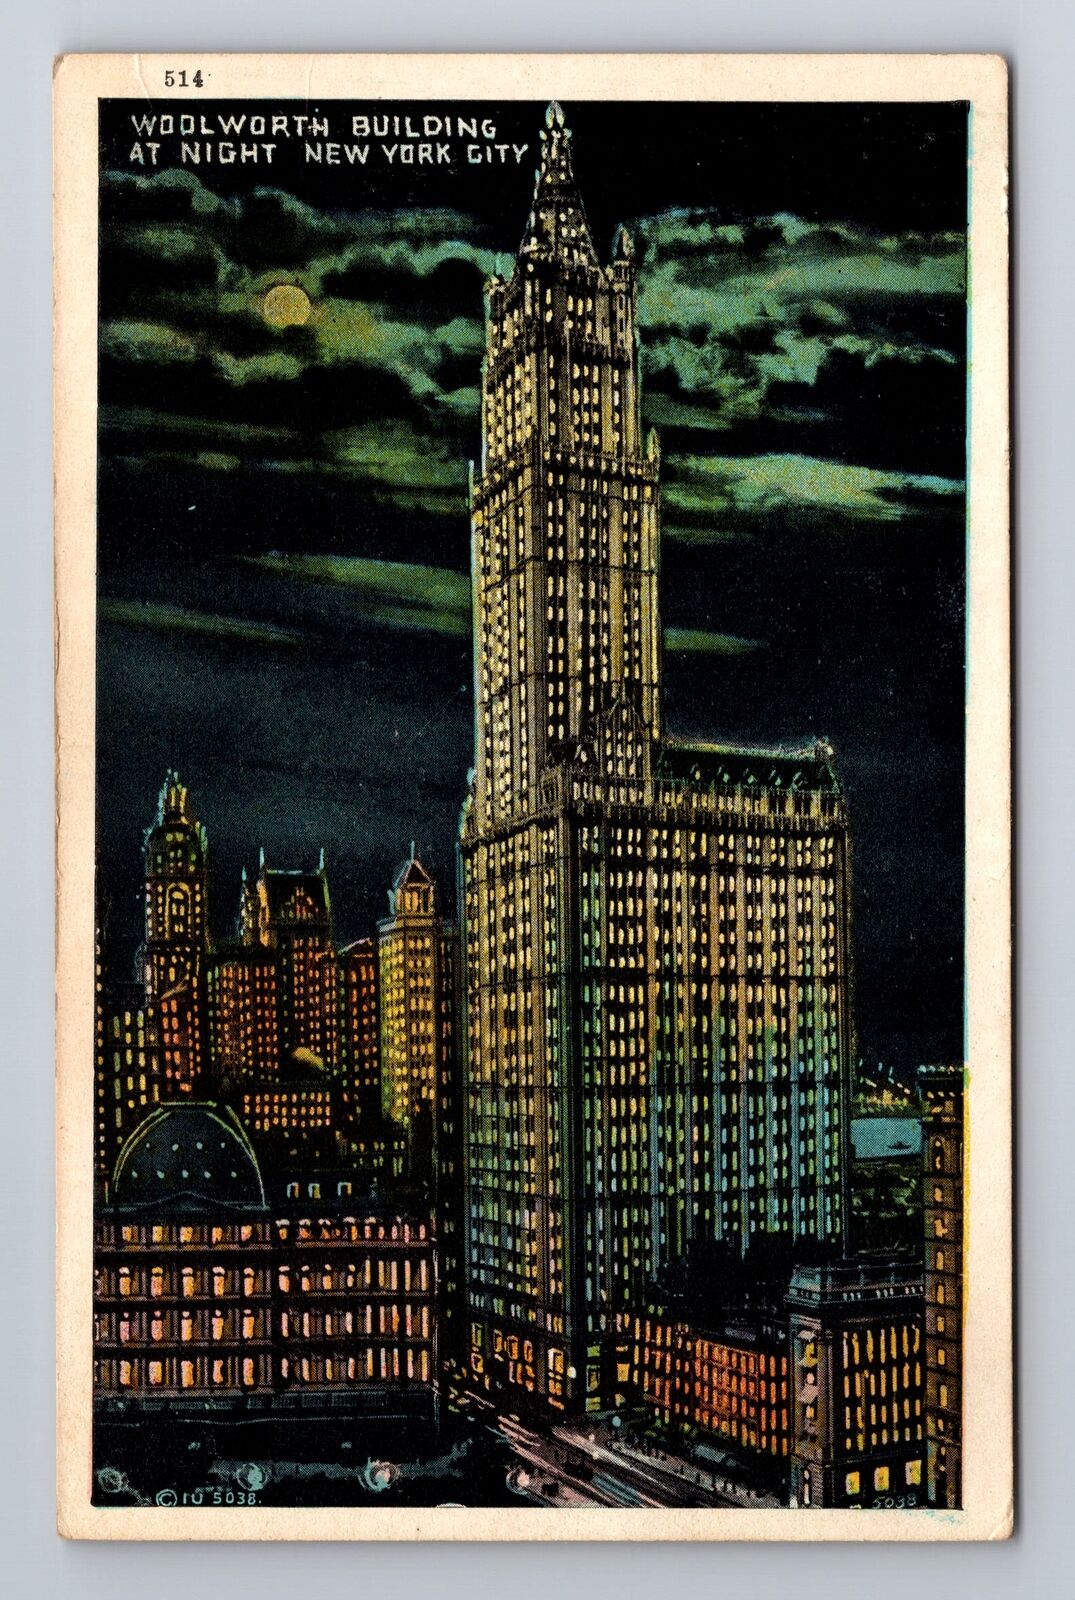 New York City NY-Woolworth Building At Night, Skyscraper, Vintage Postcard